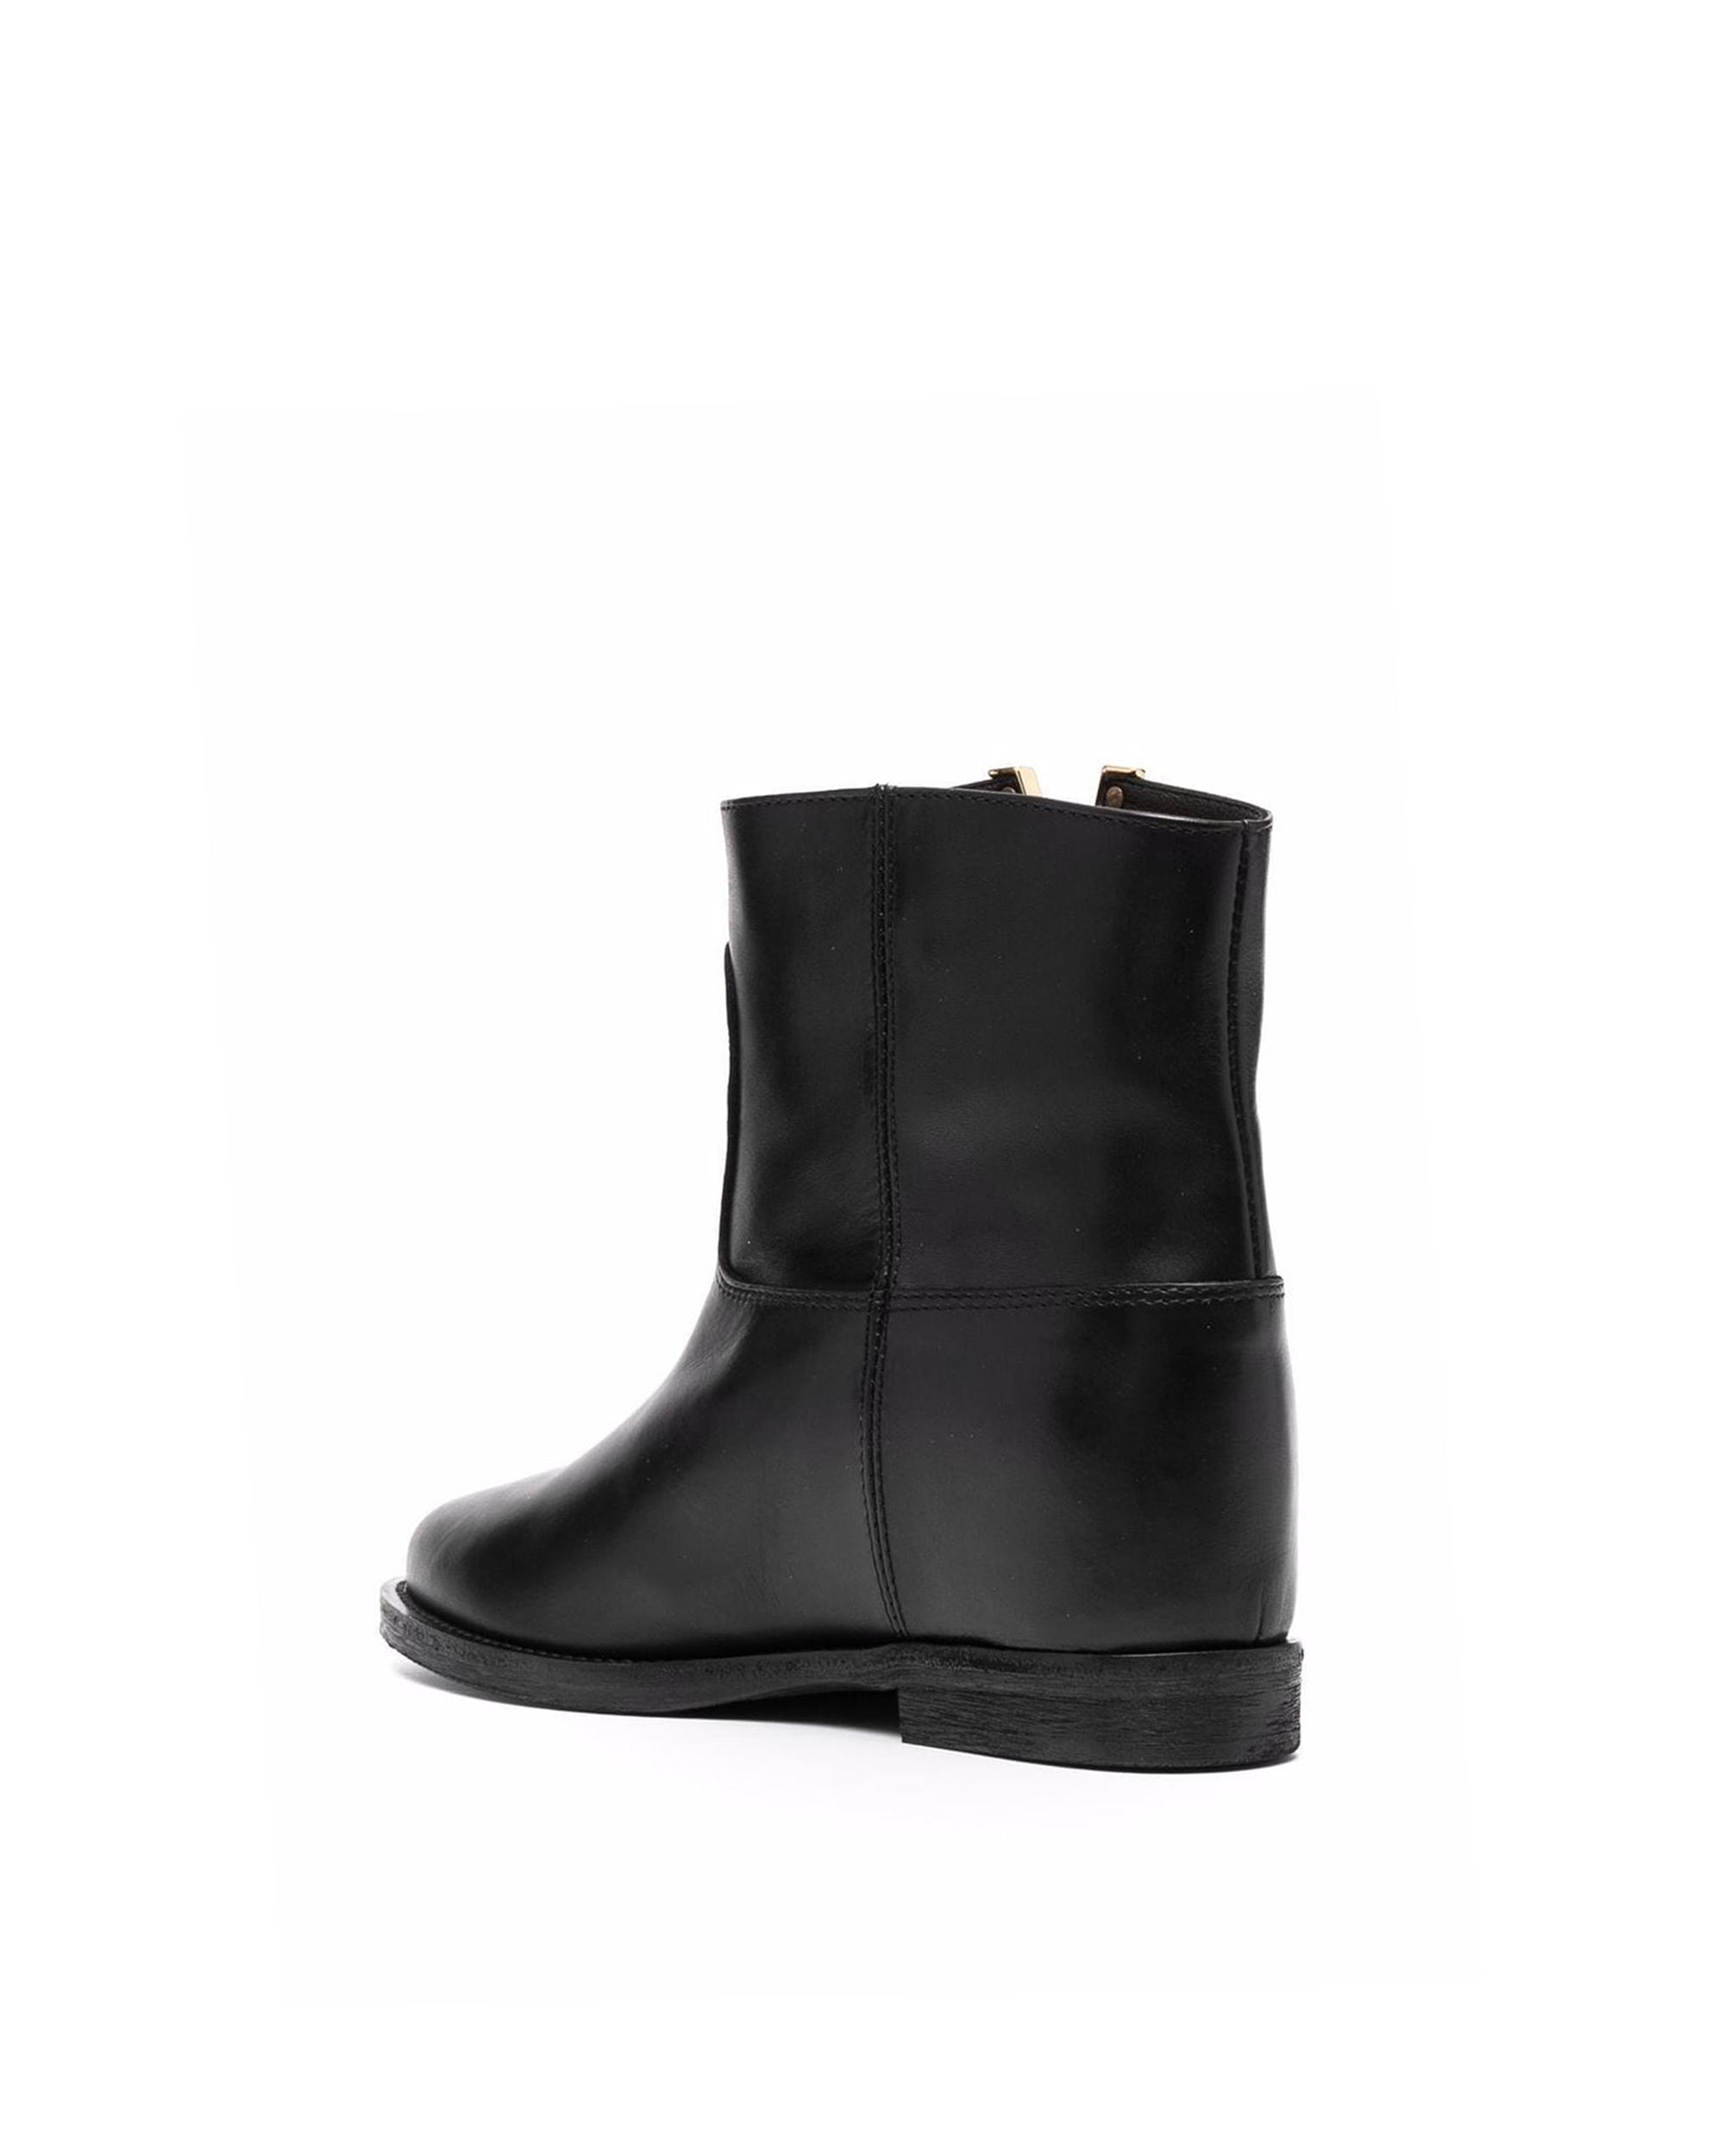 Shop Via Roma 15 Black Leather Ankle Boot With Golden "v" Detail